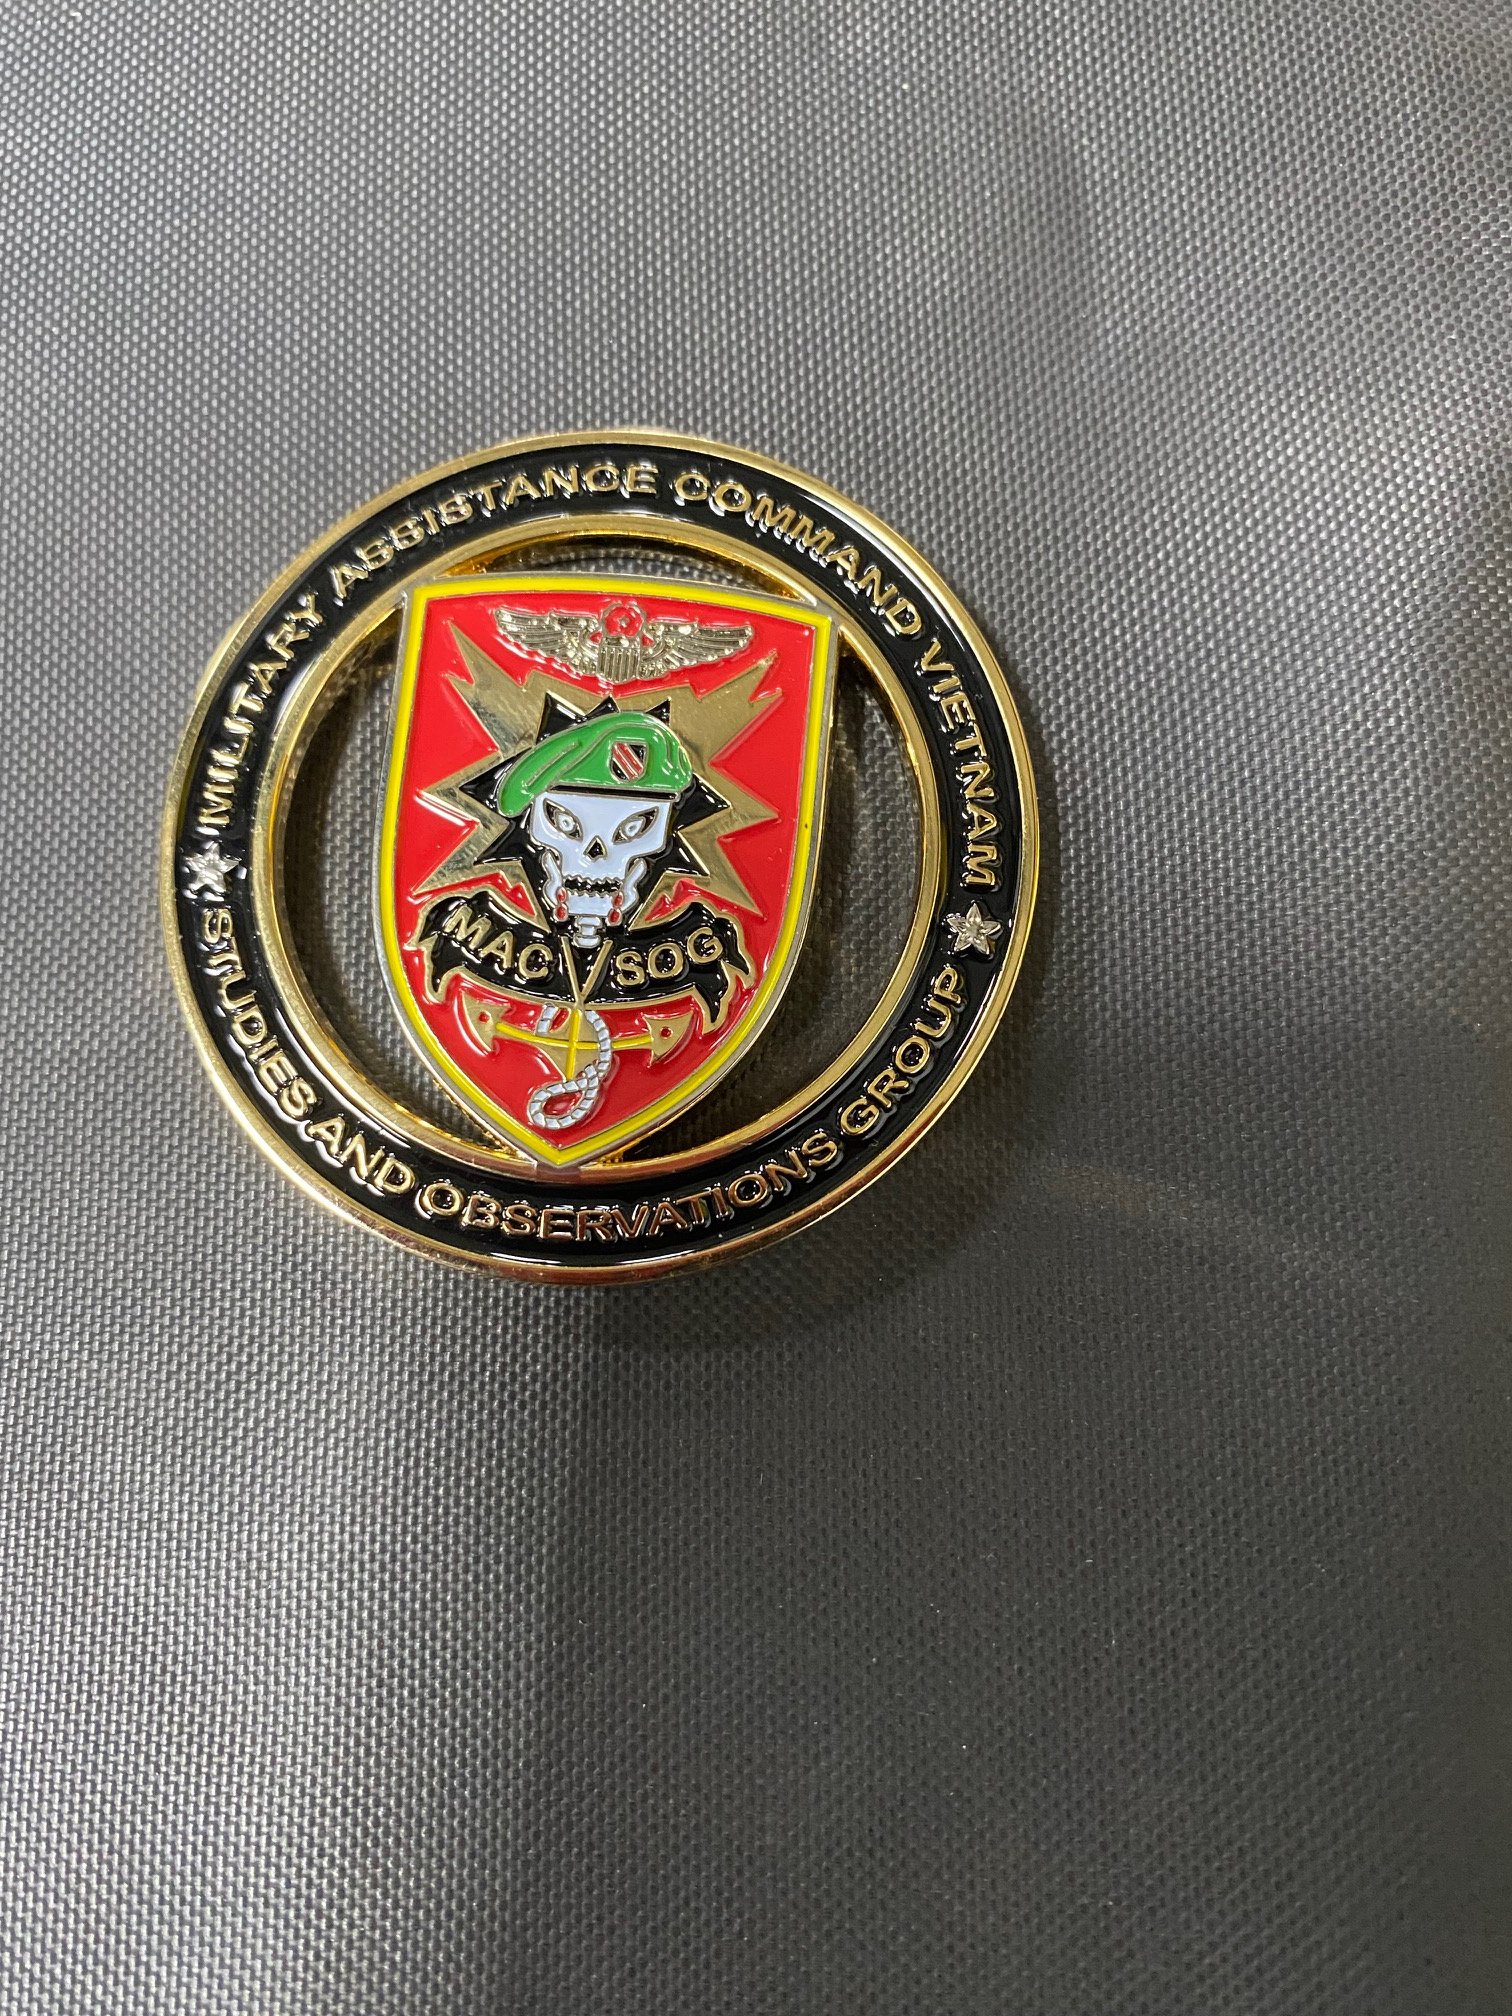 Unique Challenge Coin From SOG-MACV | Sniper's Hide Forum